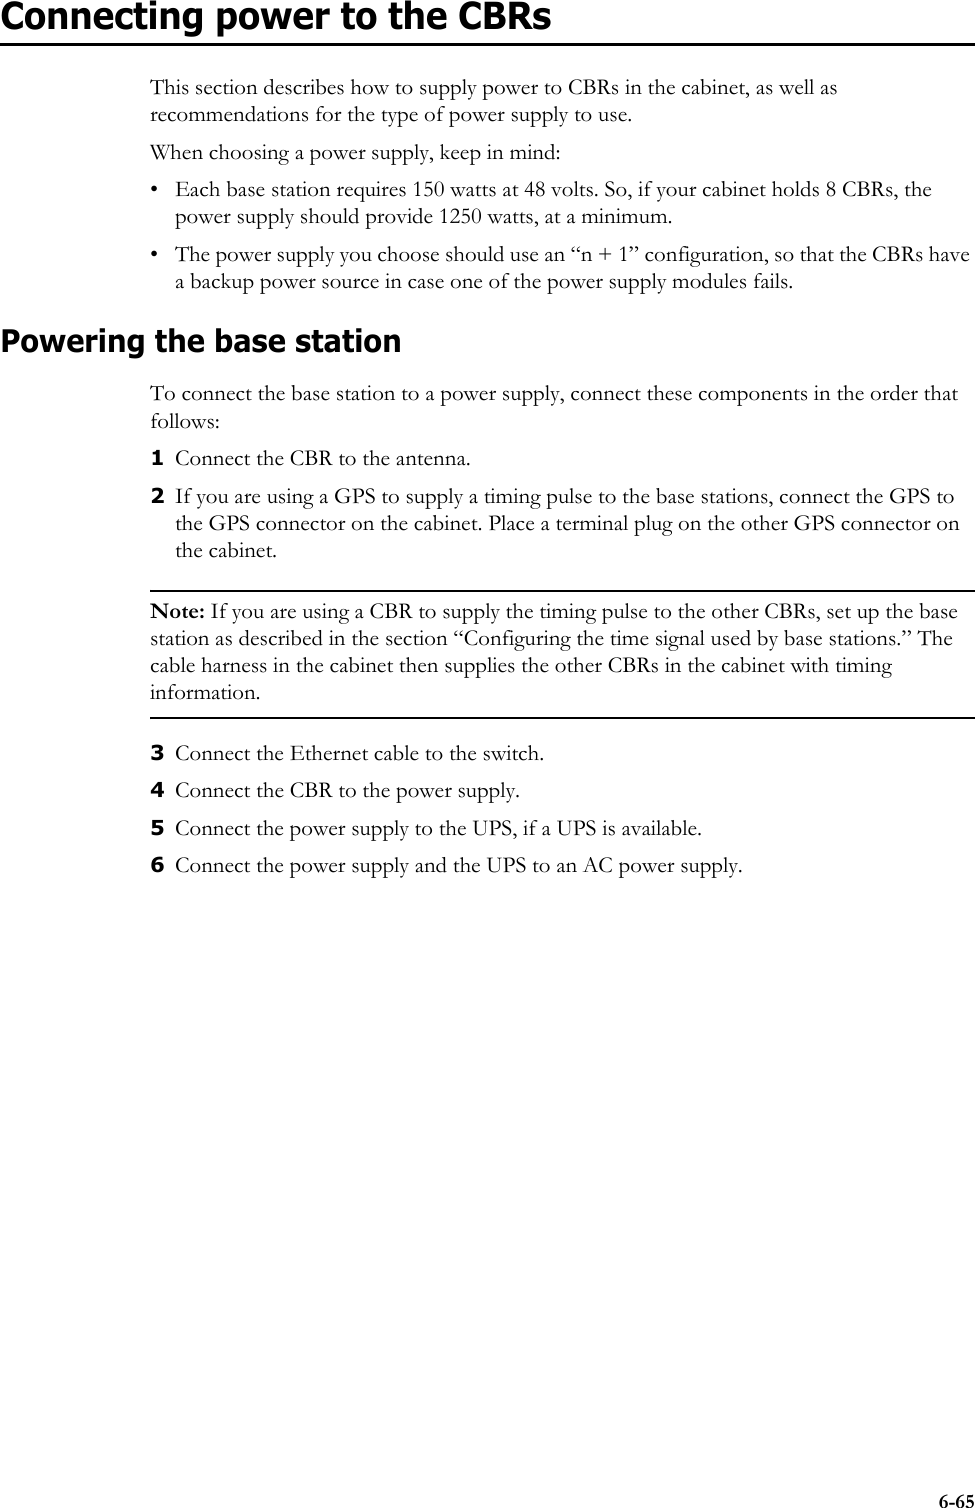 6-65Connecting power to the CBRsThis section describes how to supply power to CBRs in the cabinet, as well as recommendations for the type of power supply to use.When choosing a power supply, keep in mind:• Each base station requires 150 watts at 48 volts. So, if your cabinet holds 8 CBRs, the power supply should provide 1250 watts, at a minimum.• The power supply you choose should use an “n + 1” configuration, so that the CBRs have a backup power source in case one of the power supply modules fails. Powering the base stationTo connect the base station to a power supply, connect these components in the order that follows: 1Connect the CBR to the antenna.2If you are using a GPS to supply a timing pulse to the base stations, connect the GPS to the GPS connector on the cabinet. Place a terminal plug on the other GPS connector on the cabinet.Note: If you are using a CBR to supply the timing pulse to the other CBRs, set up the base station as described in the section “Configuring the time signal used by base stations.” The cable harness in the cabinet then supplies the other CBRs in the cabinet with timing information. 3Connect the Ethernet cable to the switch.4Connect the CBR to the power supply.5Connect the power supply to the UPS, if a UPS is available.6Connect the power supply and the UPS to an AC power supply.